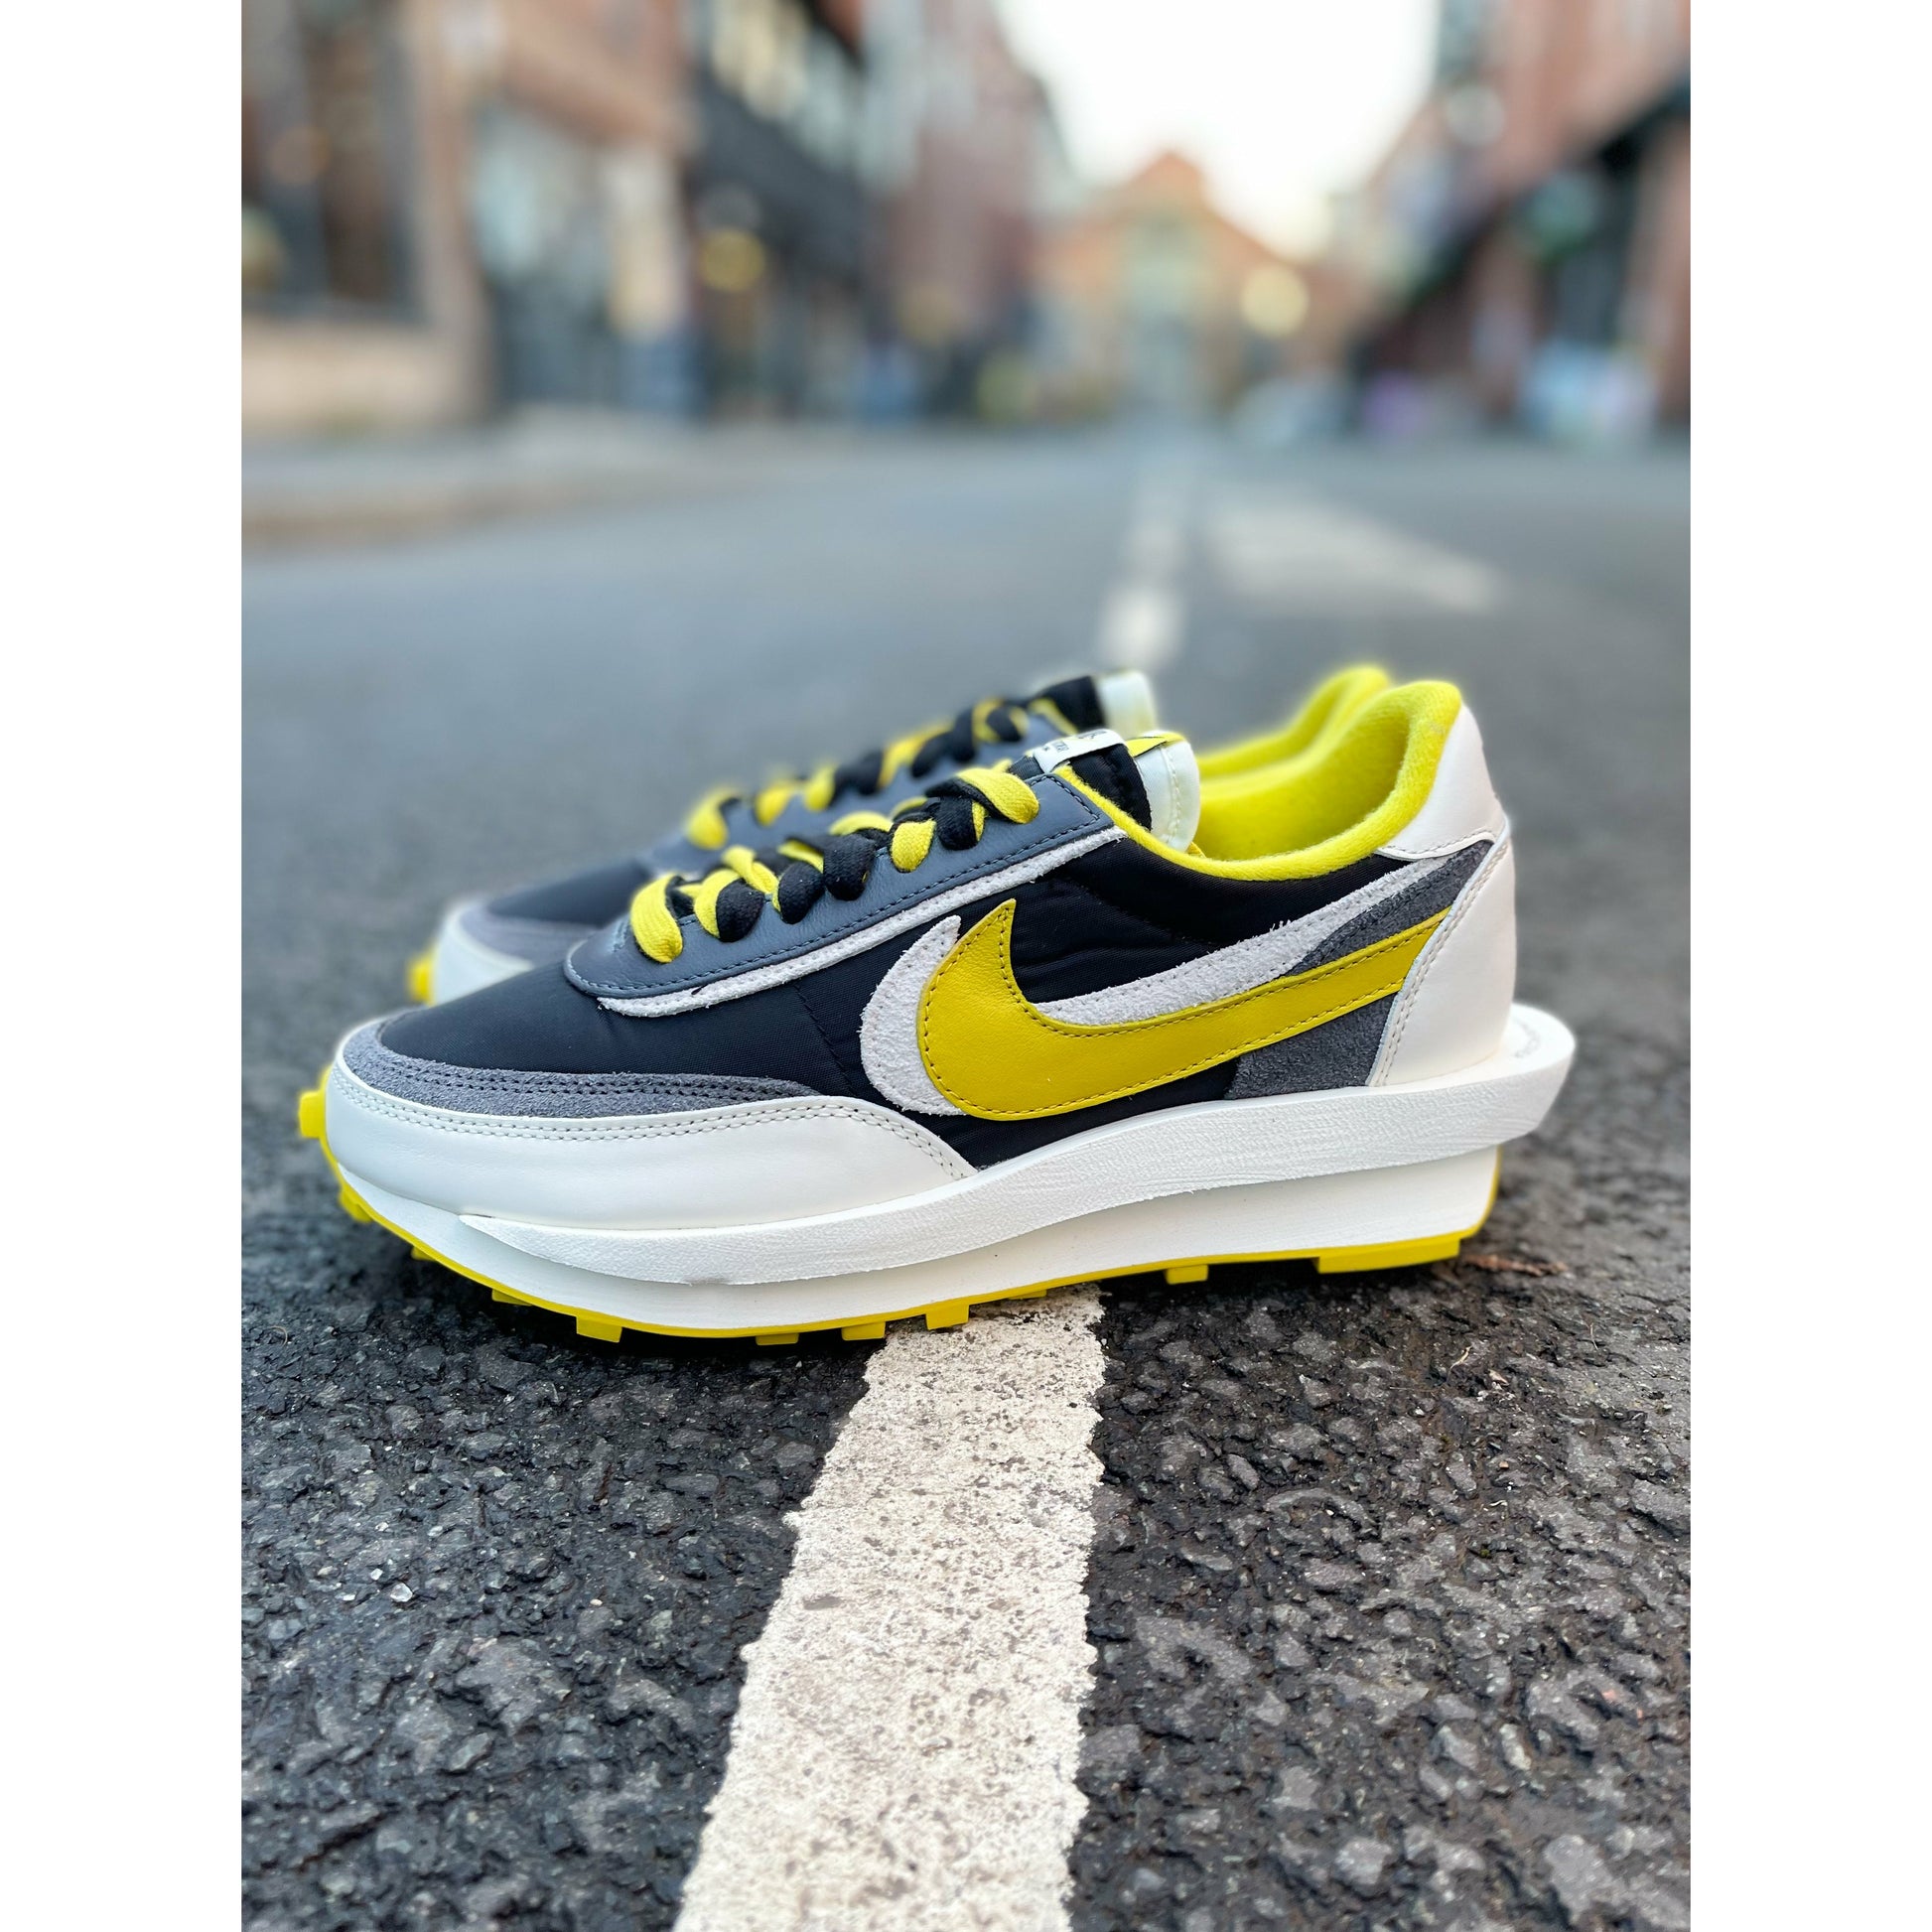 Nike LDWaffle Sacai Undercover Black Bright Citron by Nike from £225.00